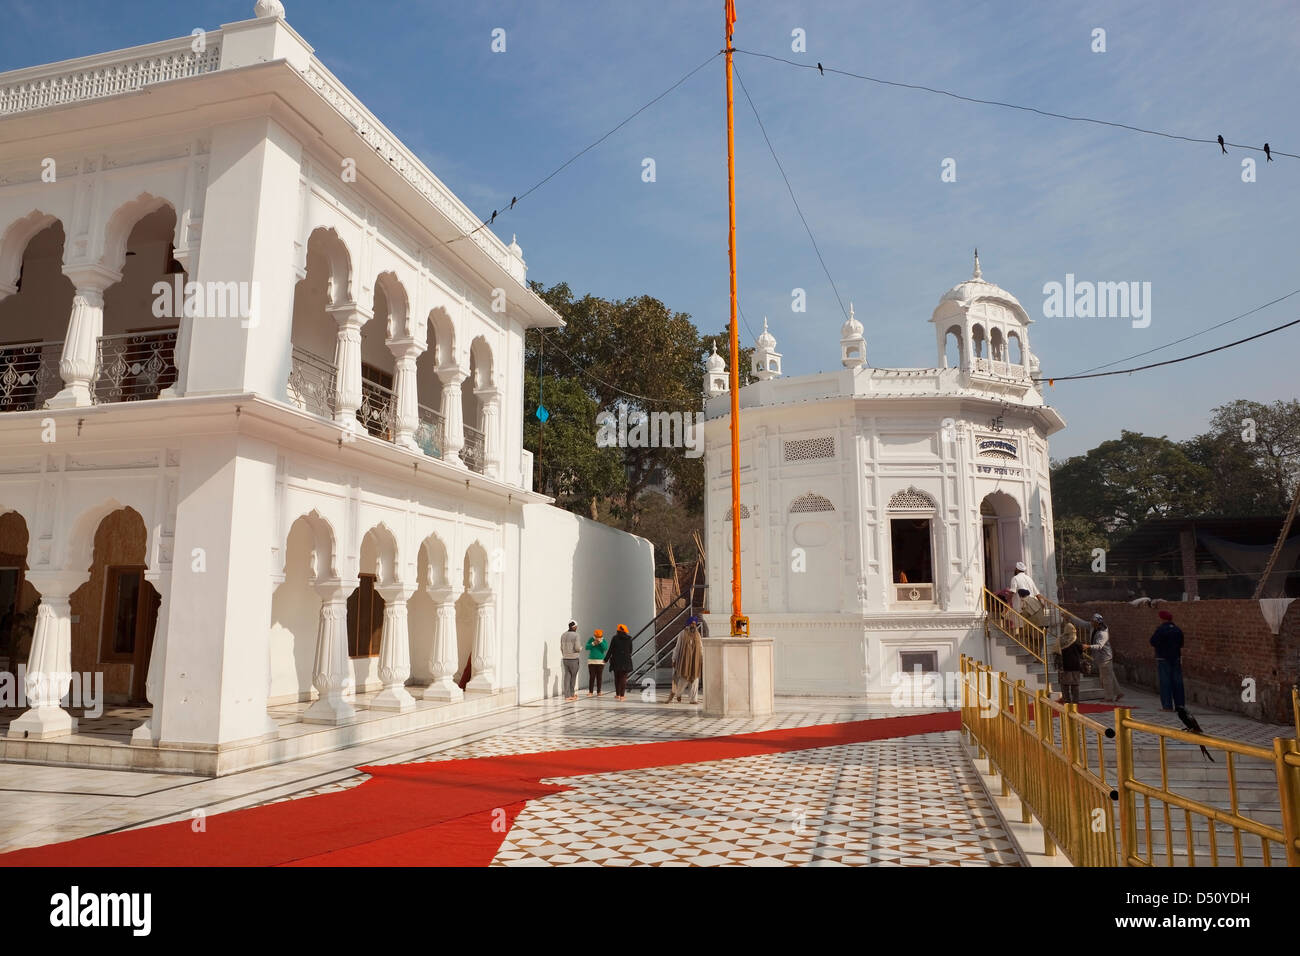 white marble architecture with Sikh pilgrims and flag pole inside the Golden Temple complex Amritsar Punjab India Stock Photo